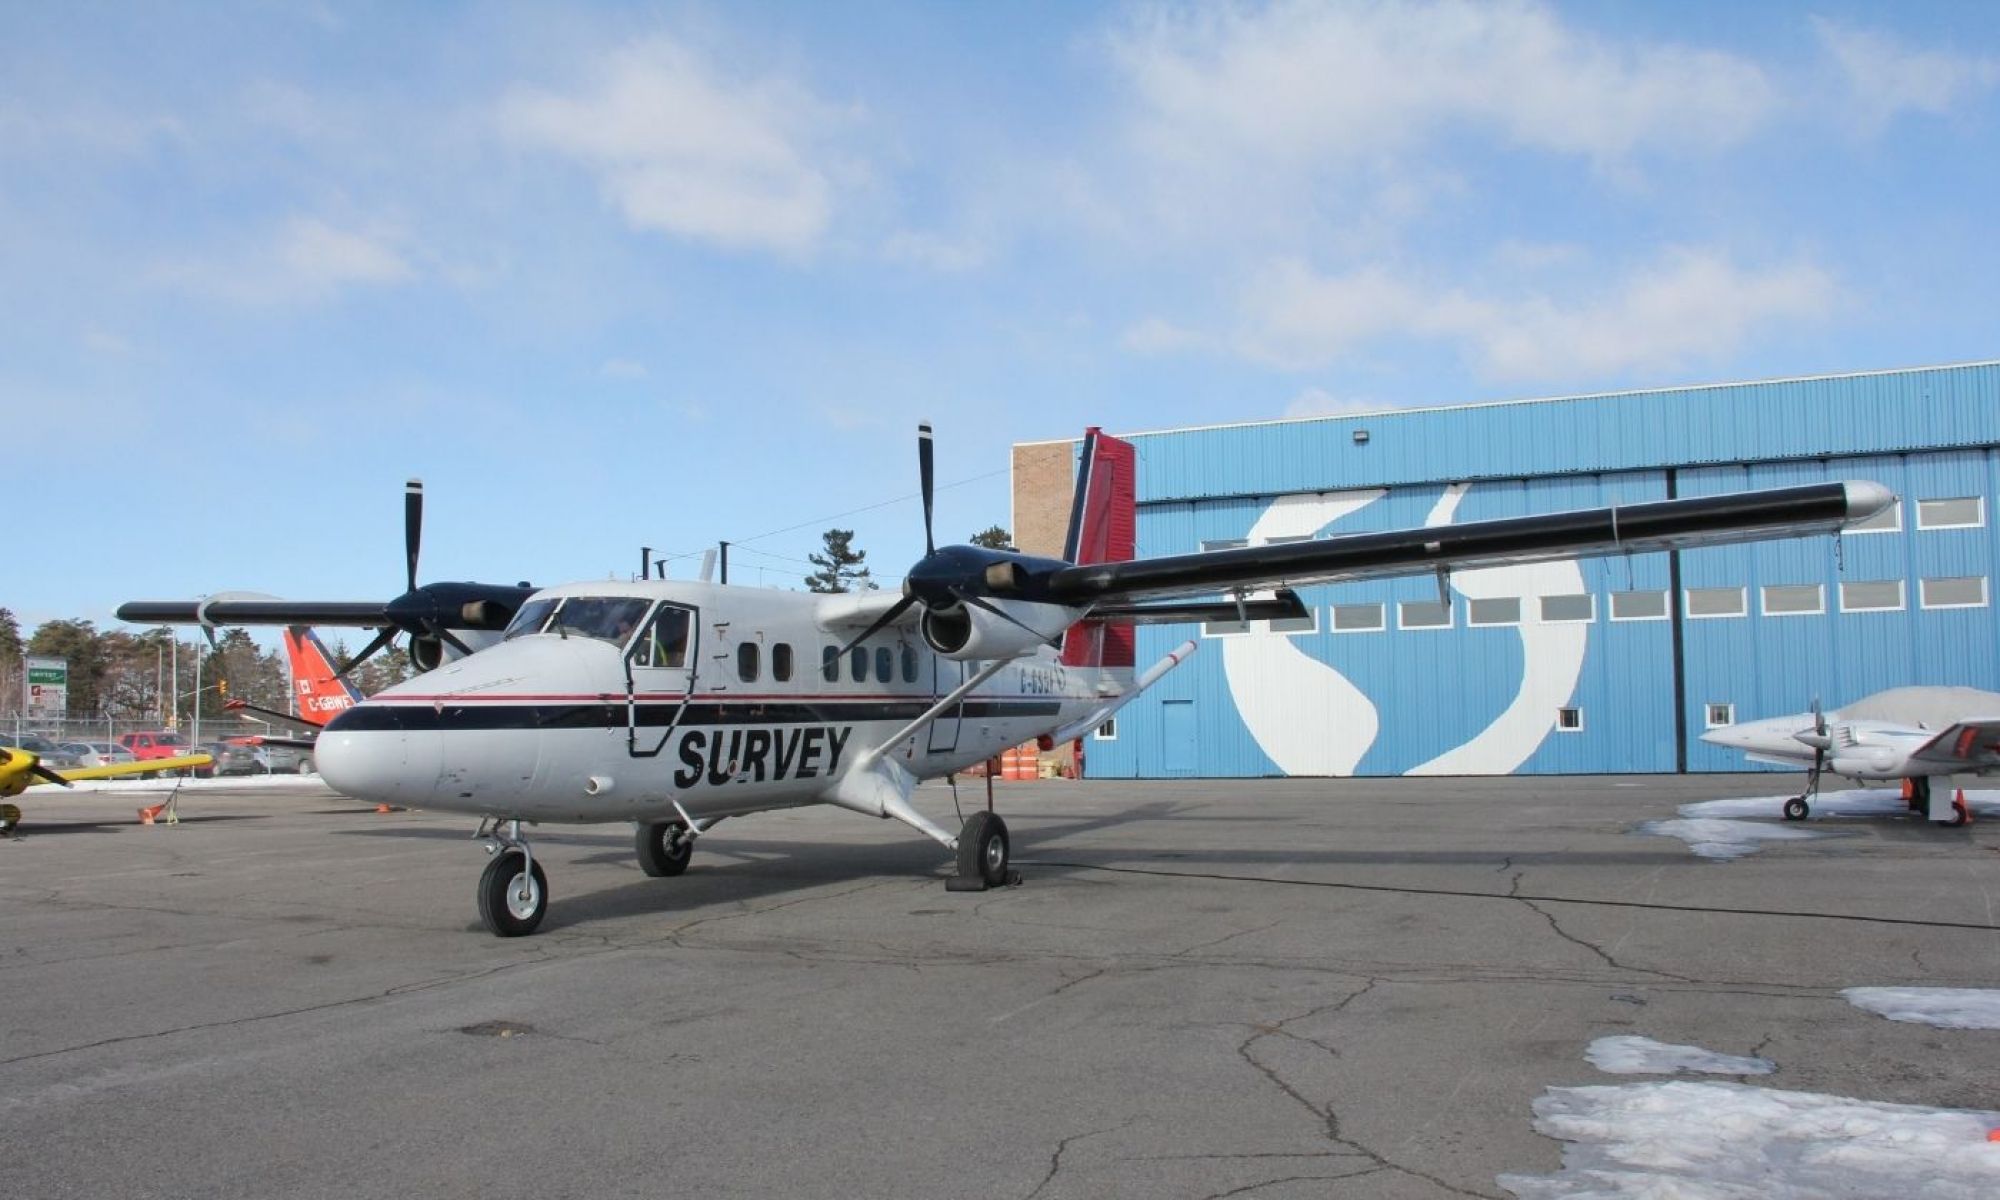 A twin engine plane with the word 'survey' written down its side in front of an aircraft hangar.